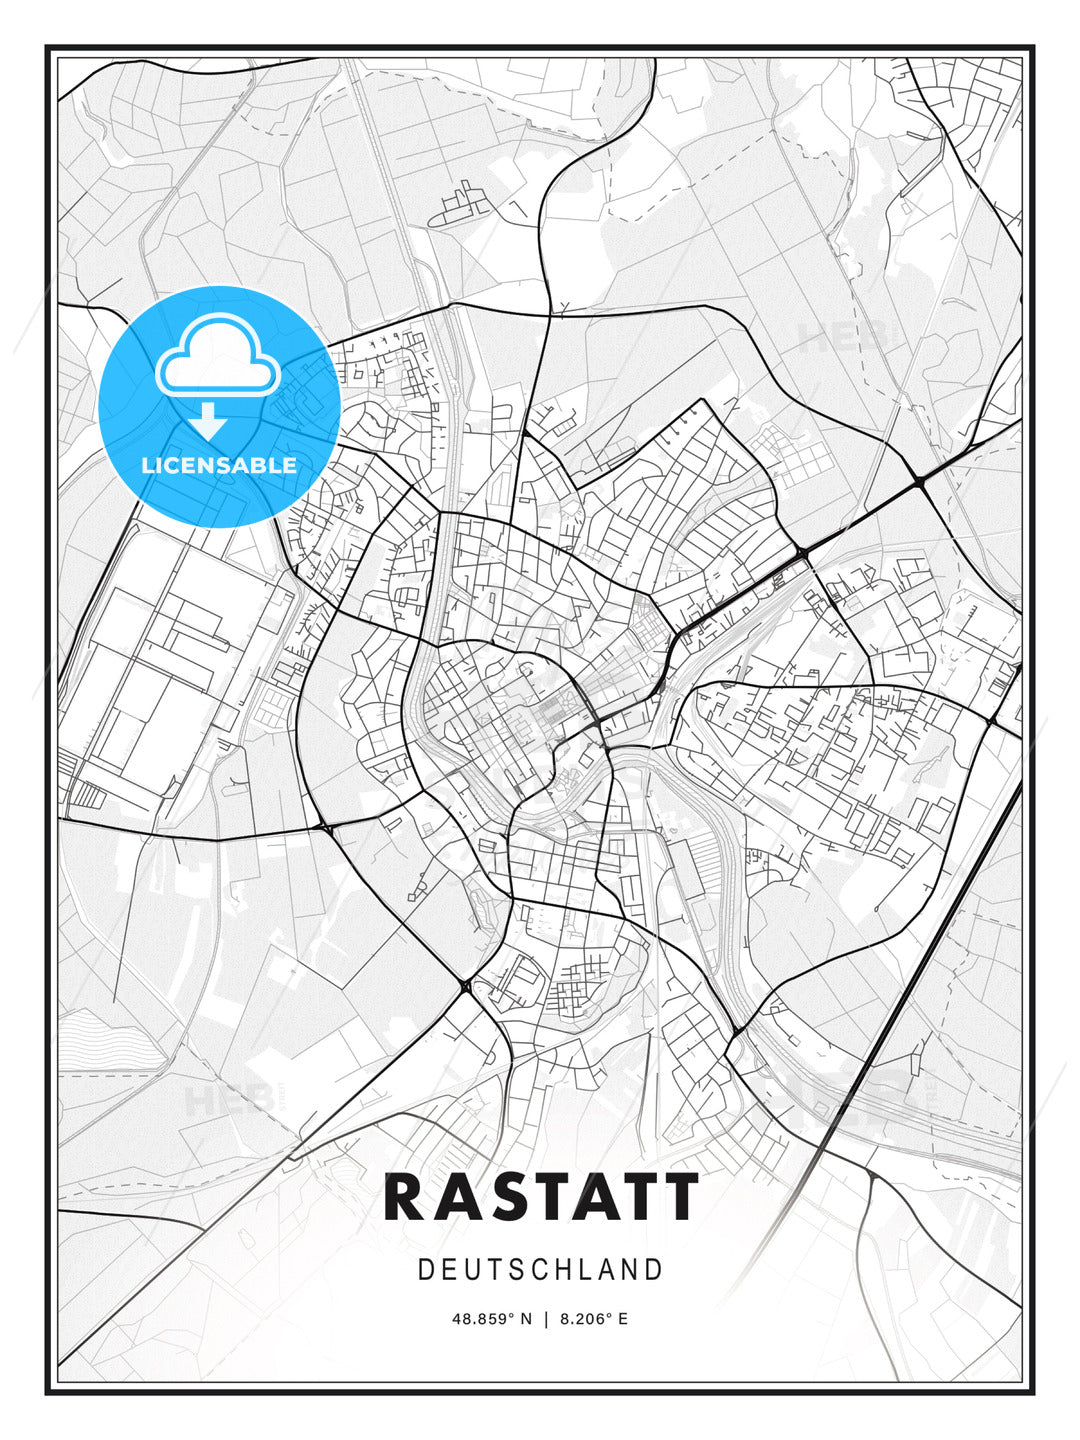 Rastatt, Germany, Modern Print Template in Various Formats - HEBSTREITS Sketches